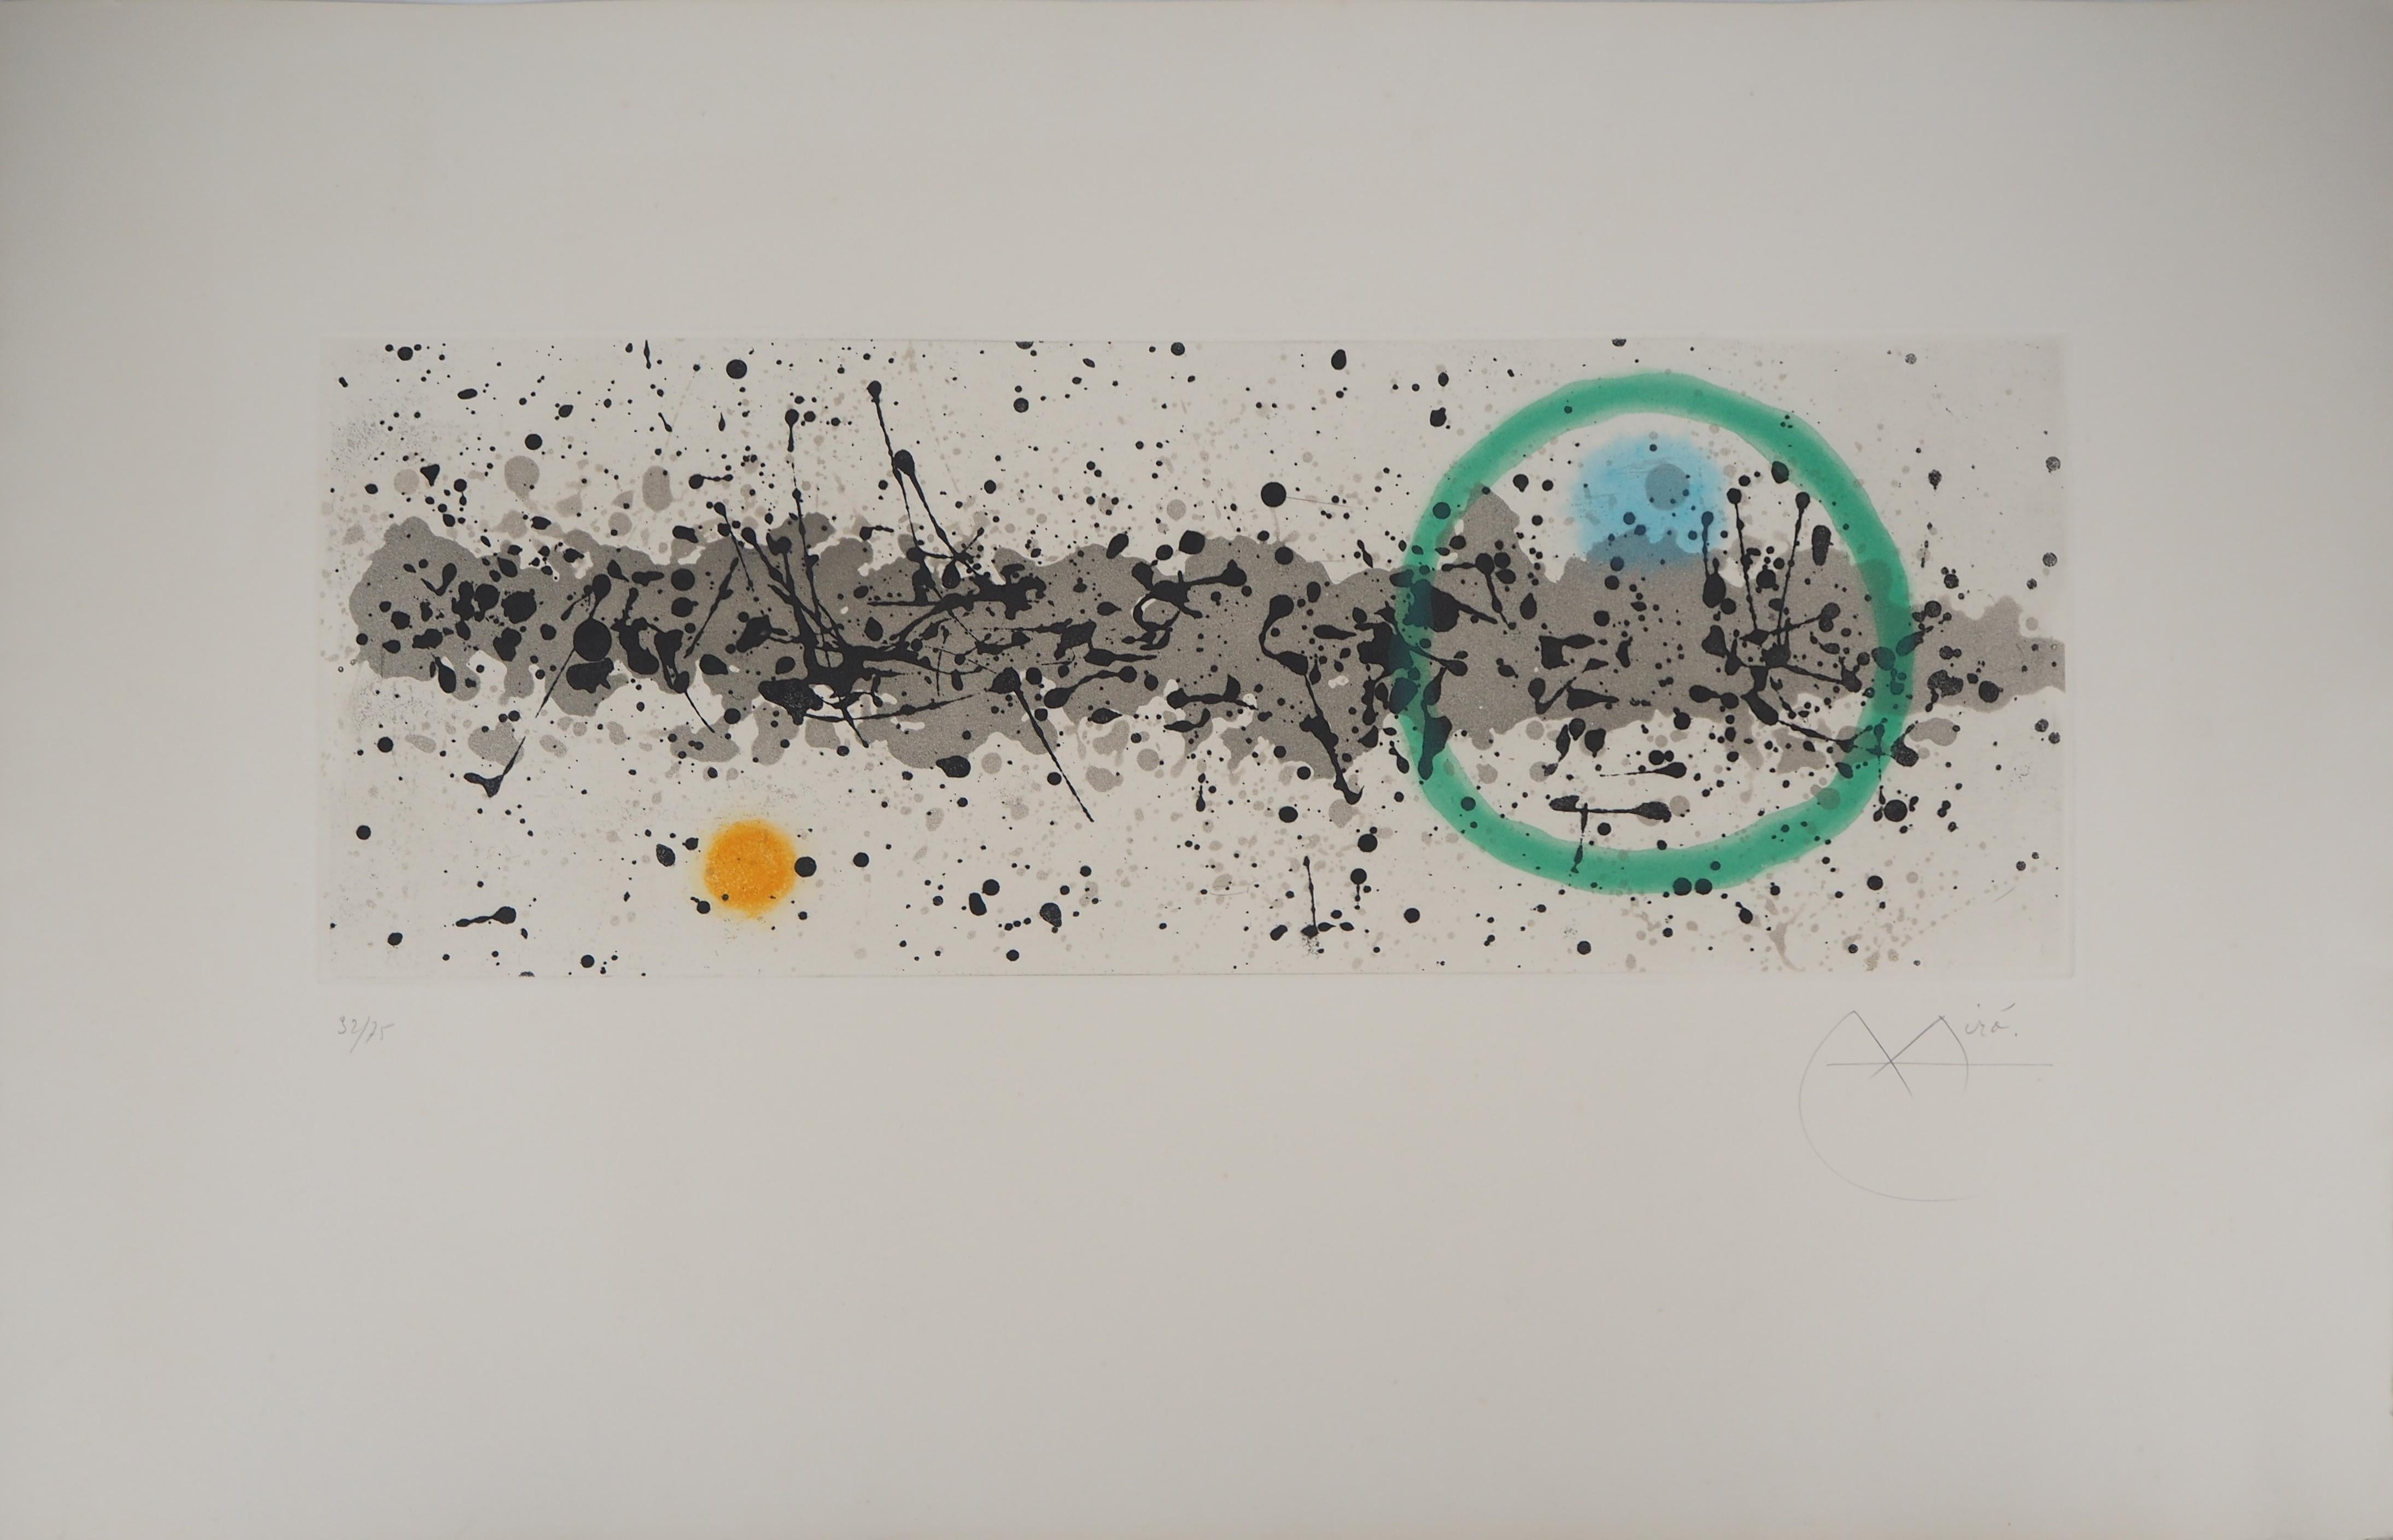 Joan Miró Abstract Print - Ouvrage du vent III - Color Etching and Aquatint, Hand Signed (Dupin #344)